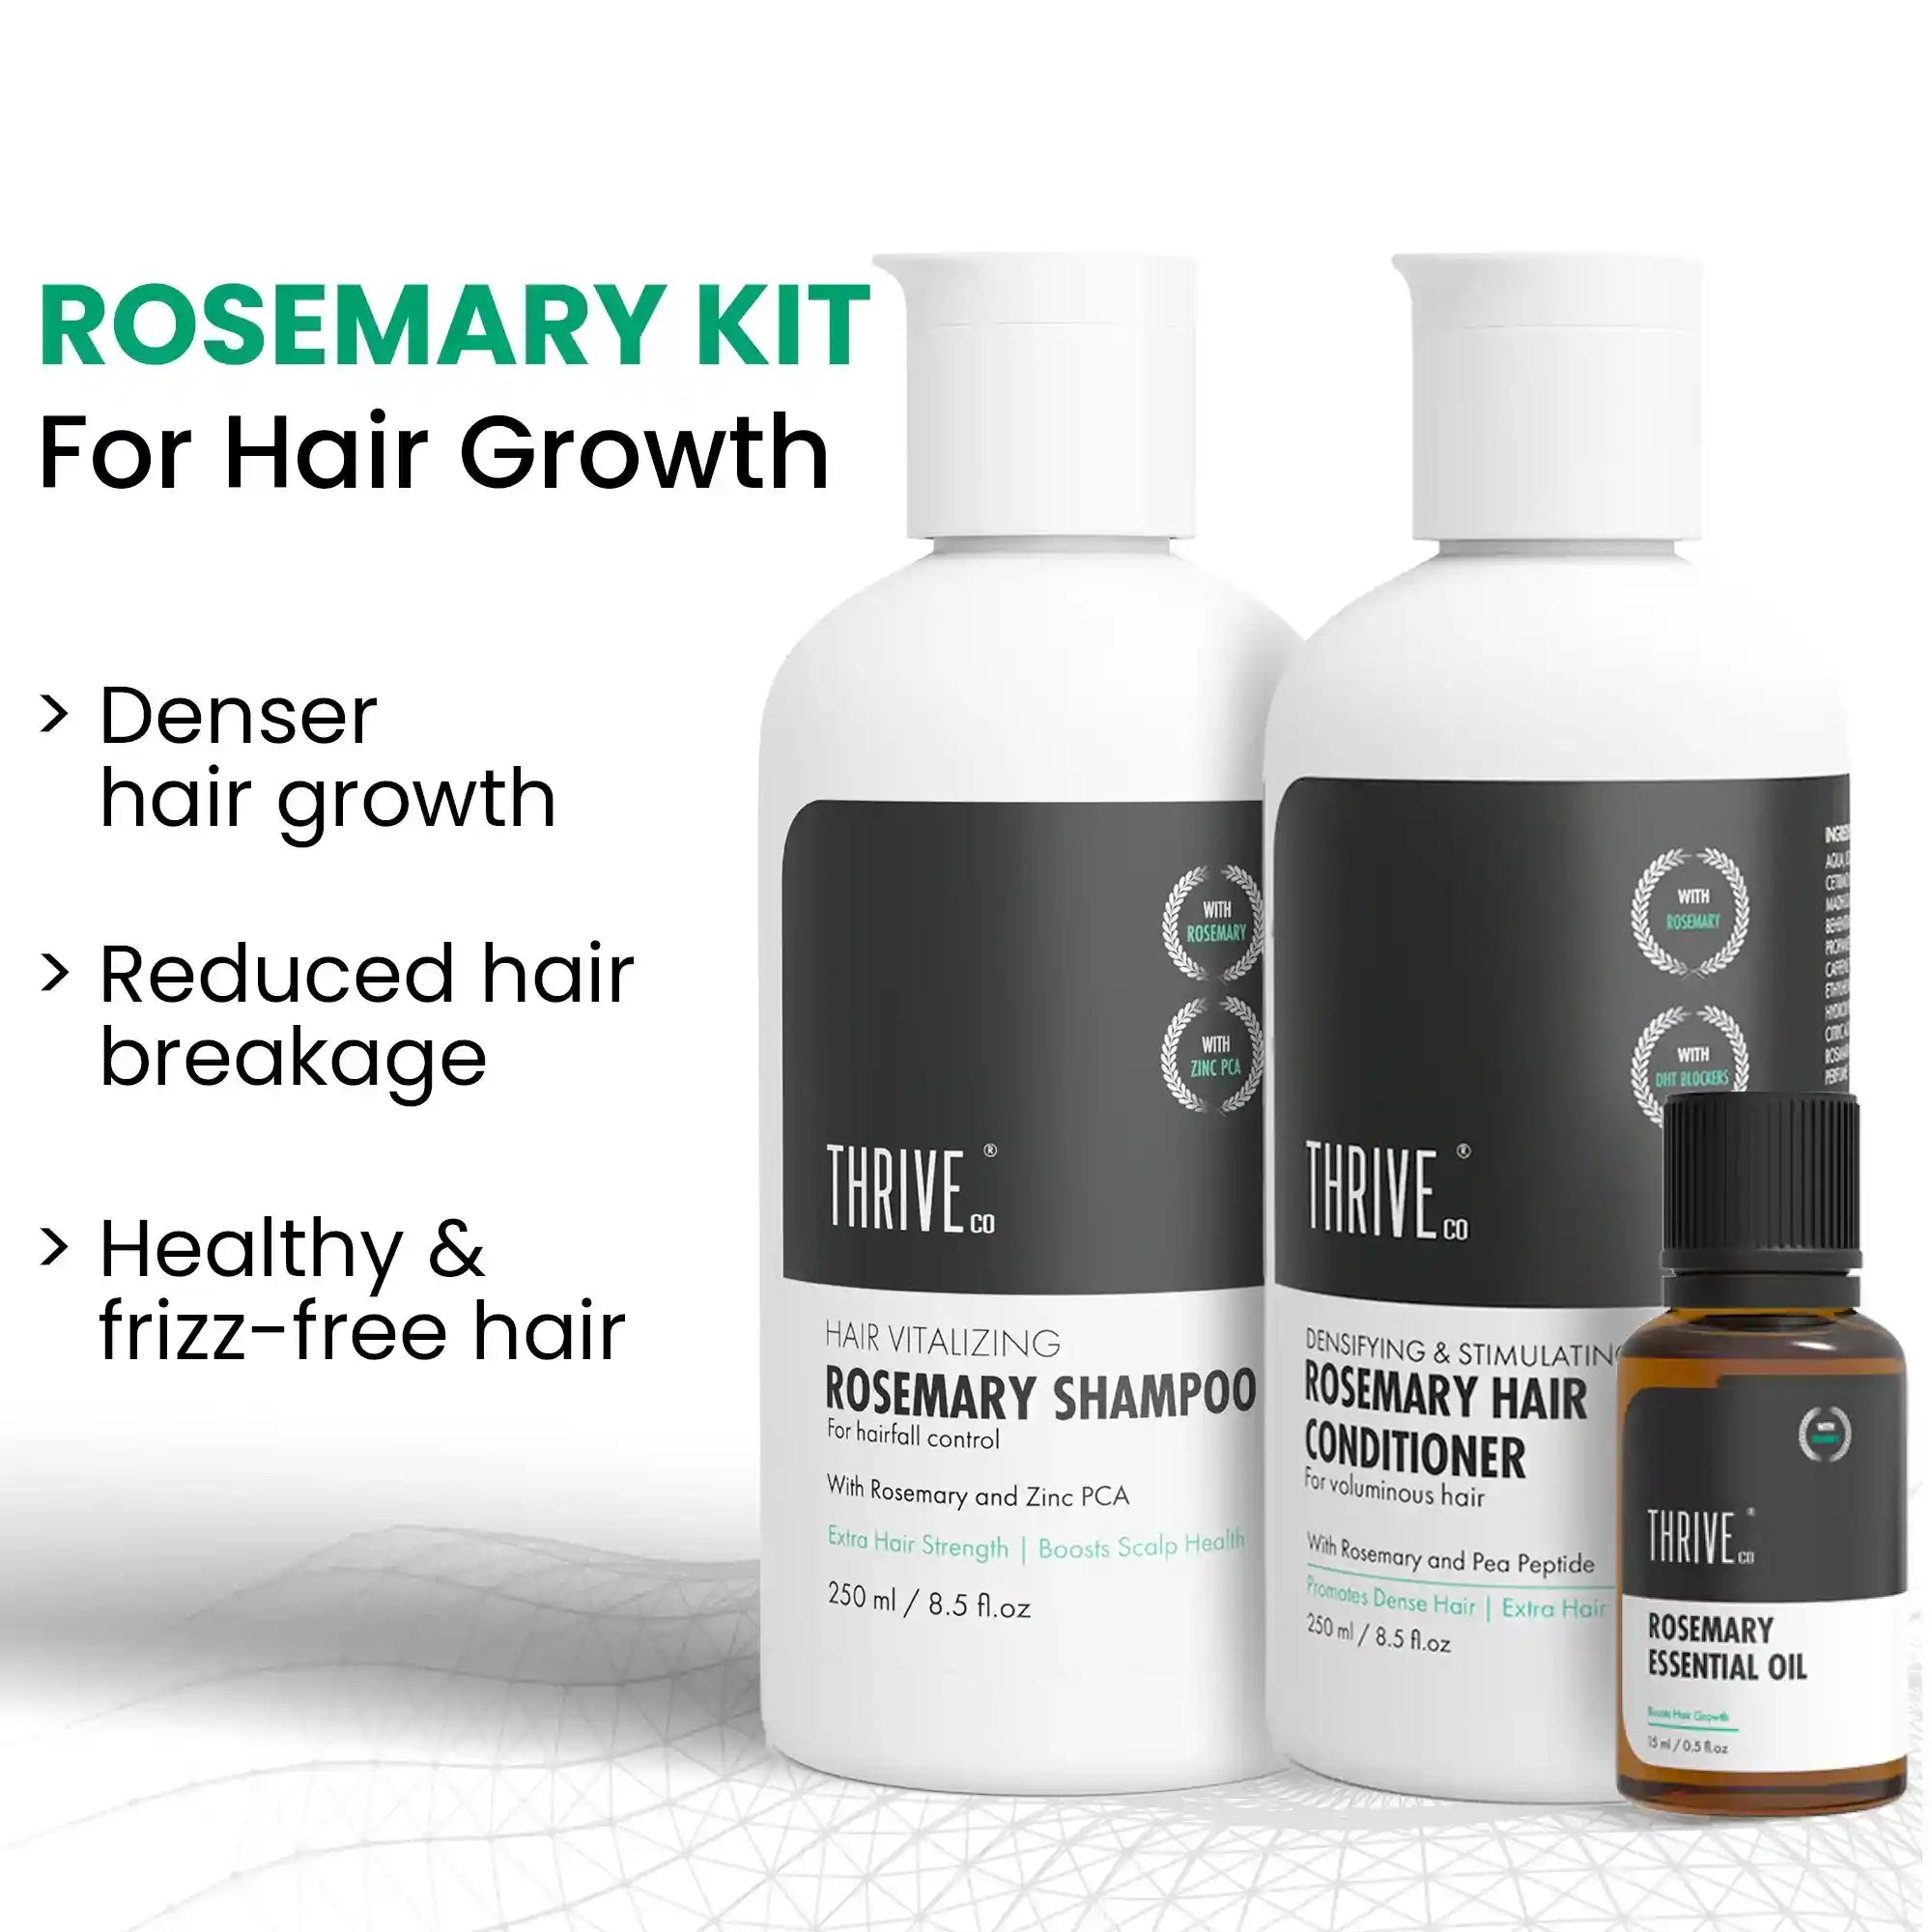 rosemary kit for hair growth with shampoo conditioner and oil